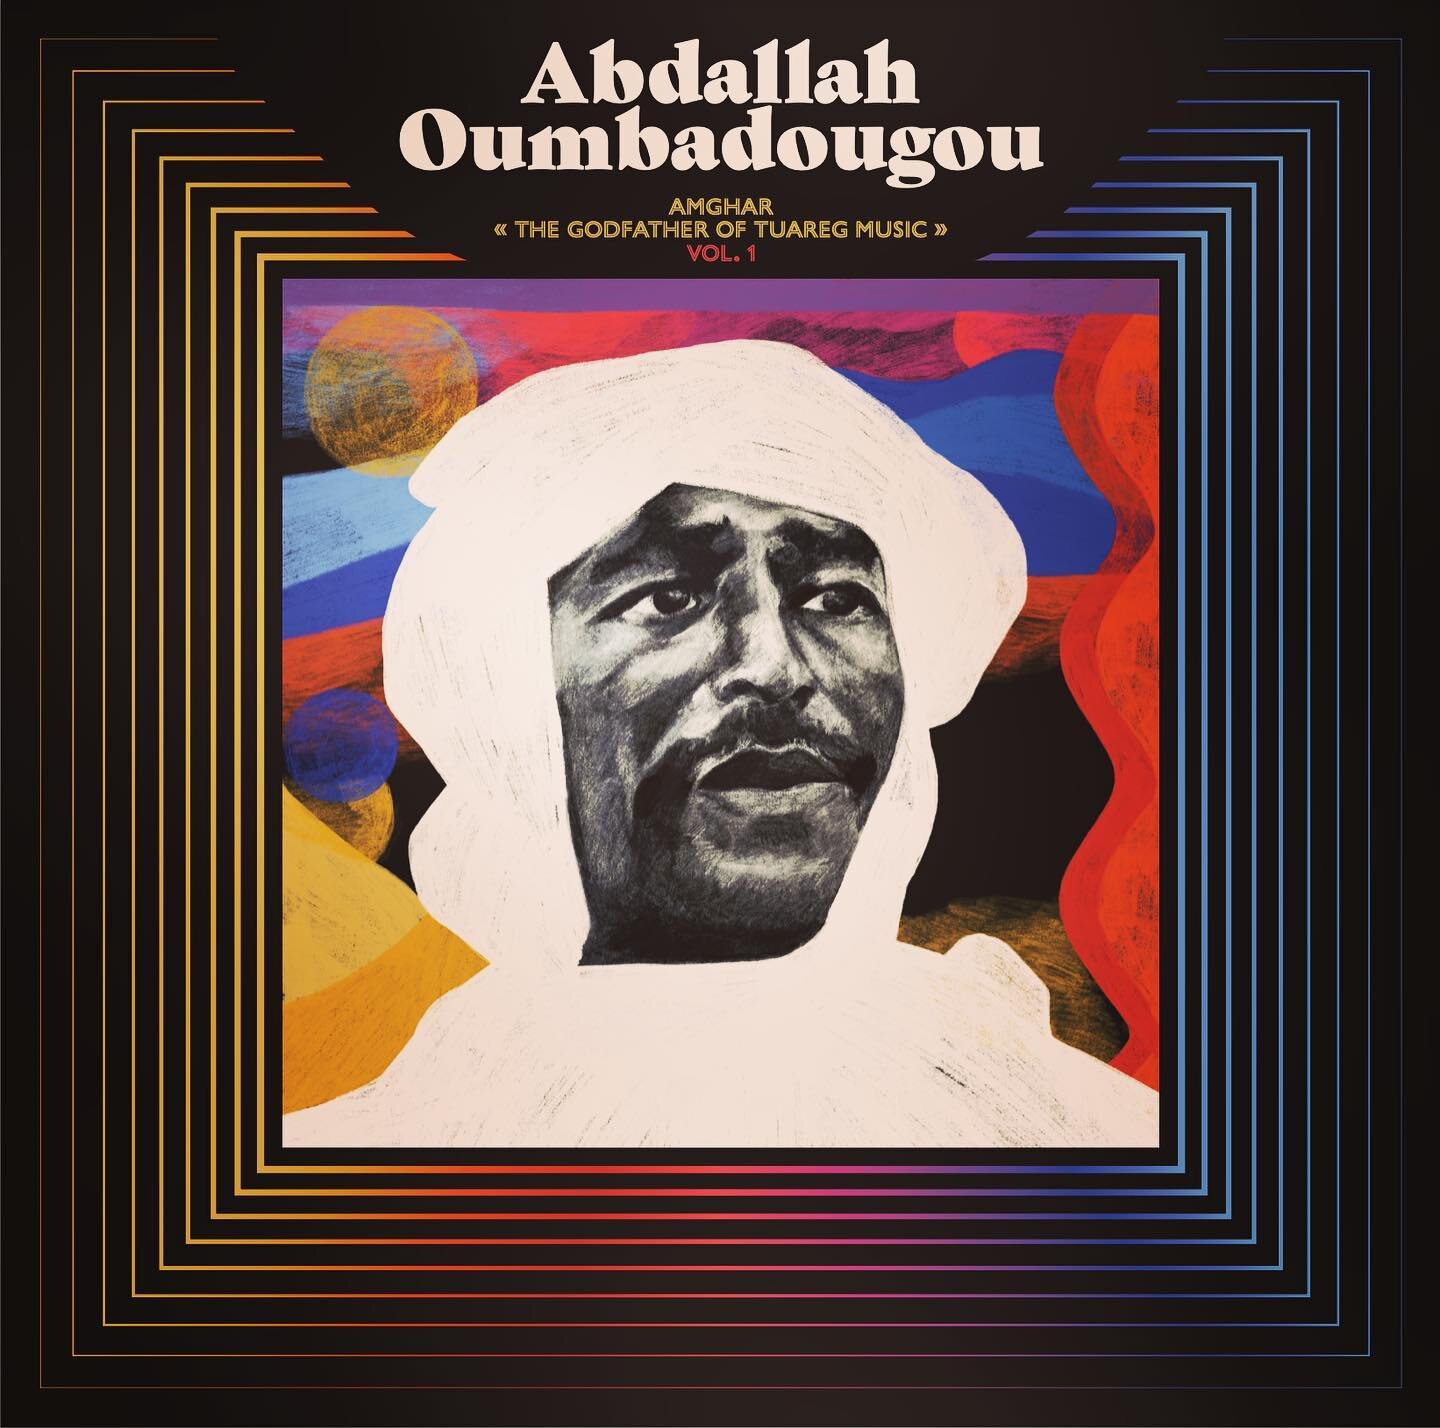 .. is very pleased to announce the forthcoming release Amghar: The Godfather of Tuareg Music - VOL. 1 - the first career retrospective of the legendary, late Tuareg innovator ABDALLAH OUMBADOUGOU, who is considered the Godfather of the Desert Blues g